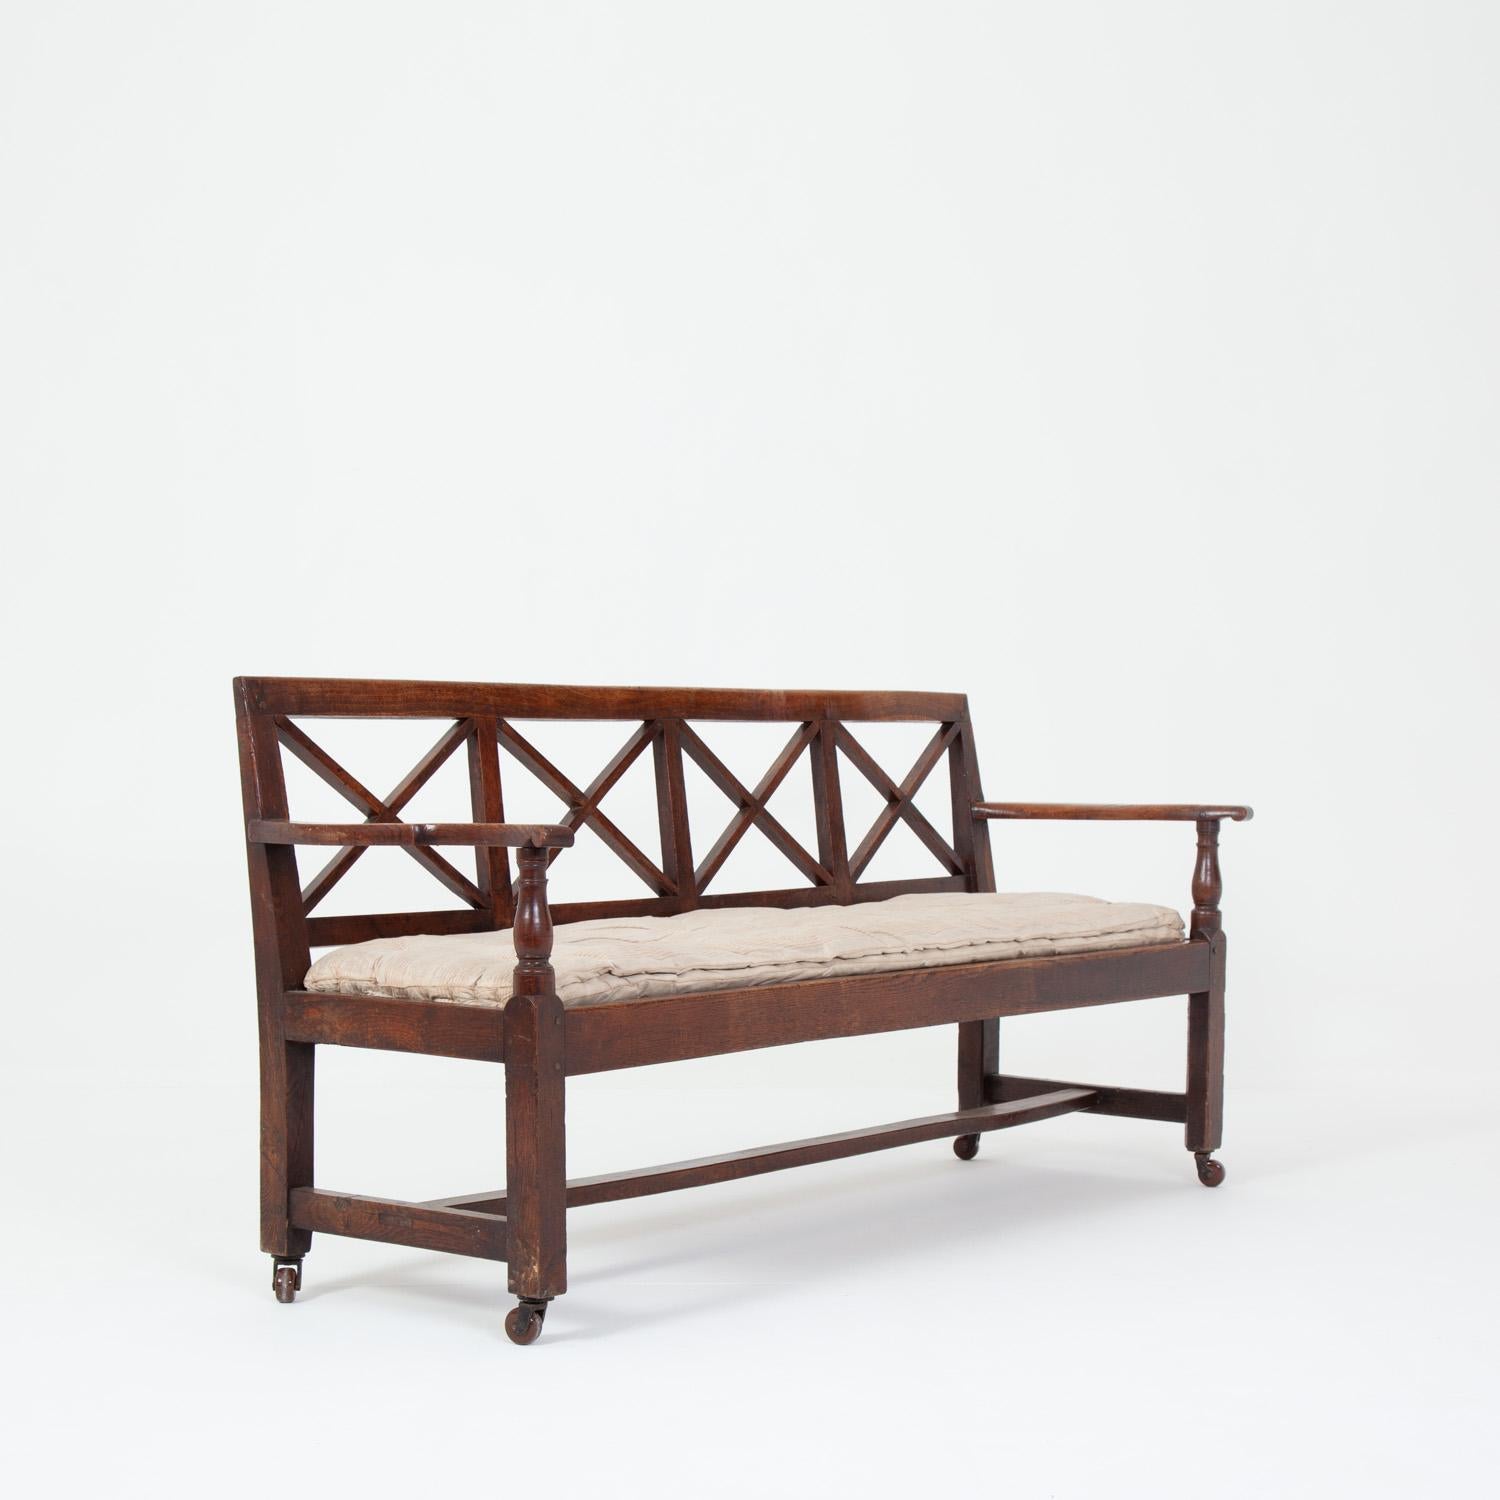 Hugely attractive unusual Westmorland bench on casters.

Sturdy and strong, in great condition for a late Georgian piece with a lovely patina.

The original seat was replaced with old springs at some point in the bench’s history, which makes for a